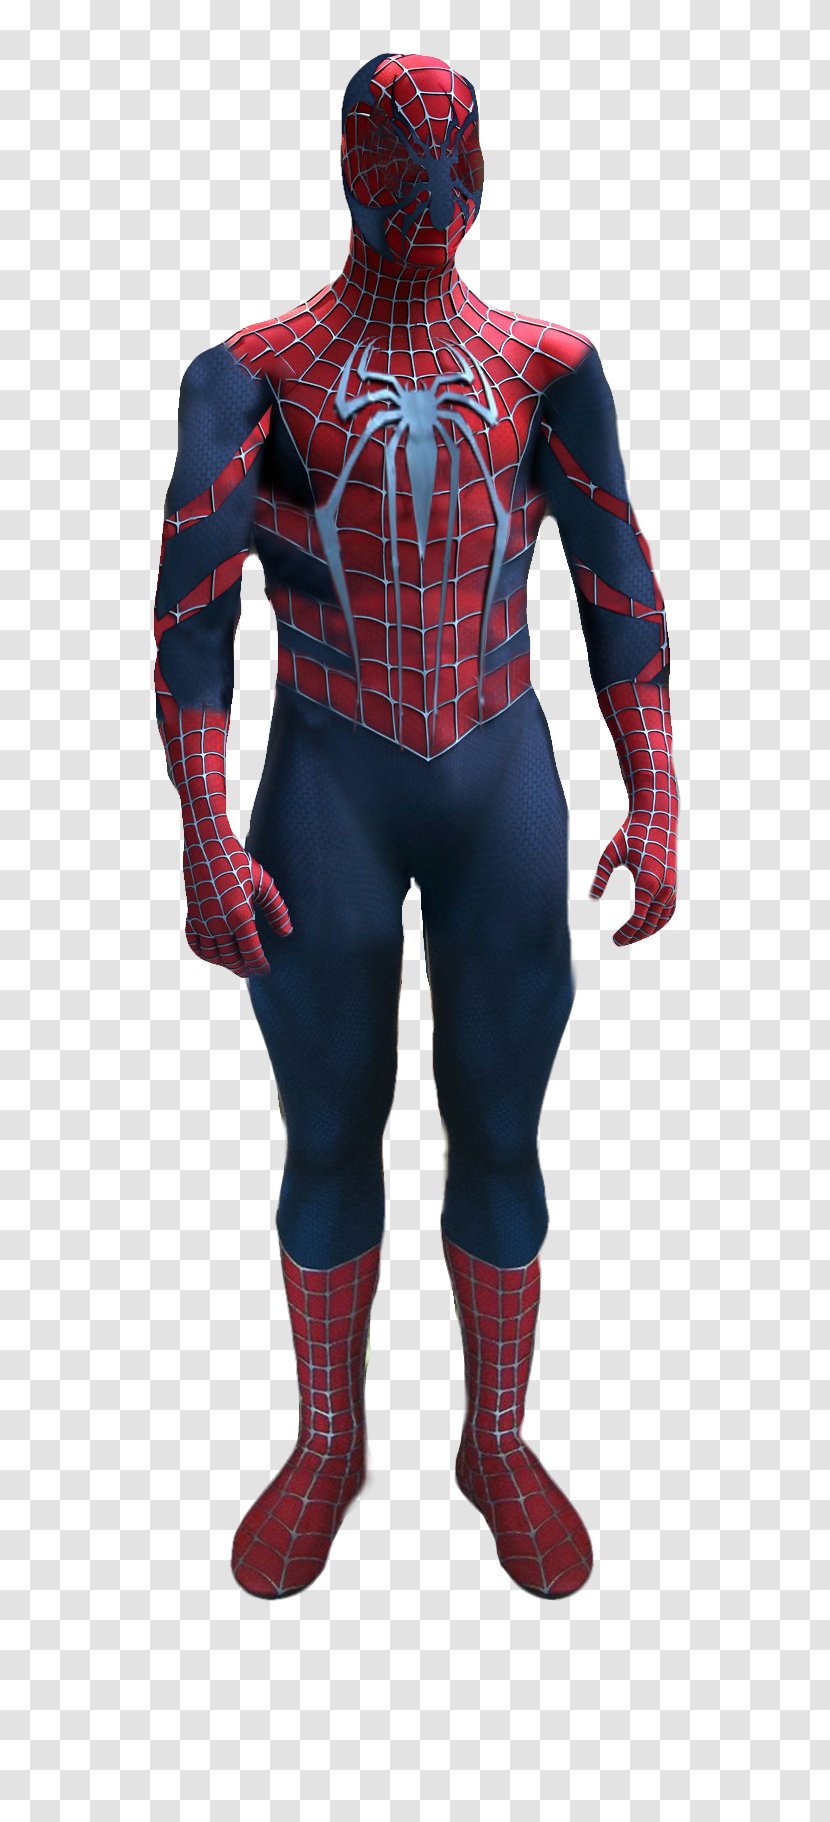 Civil War: The Amazing Spider-Man Concept Art Ultimate Drawing - Iron Spiderman Transparent PNG